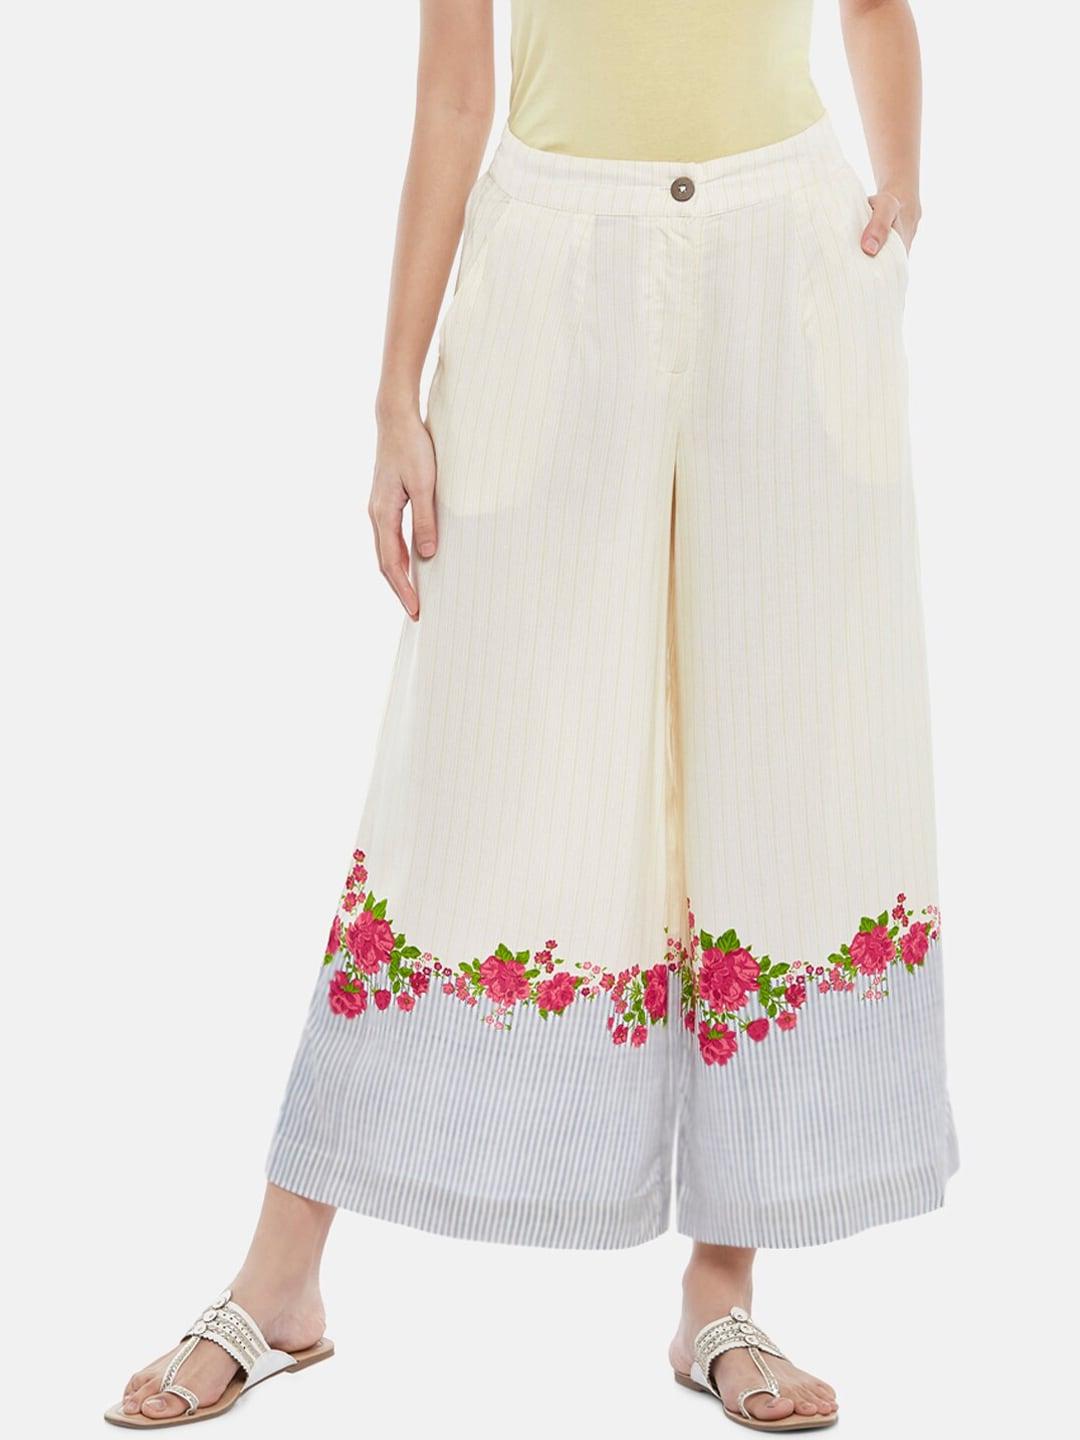 akkriti-by-pantaloons-women-off-white-floral-printed-pleated-culottes-trousers